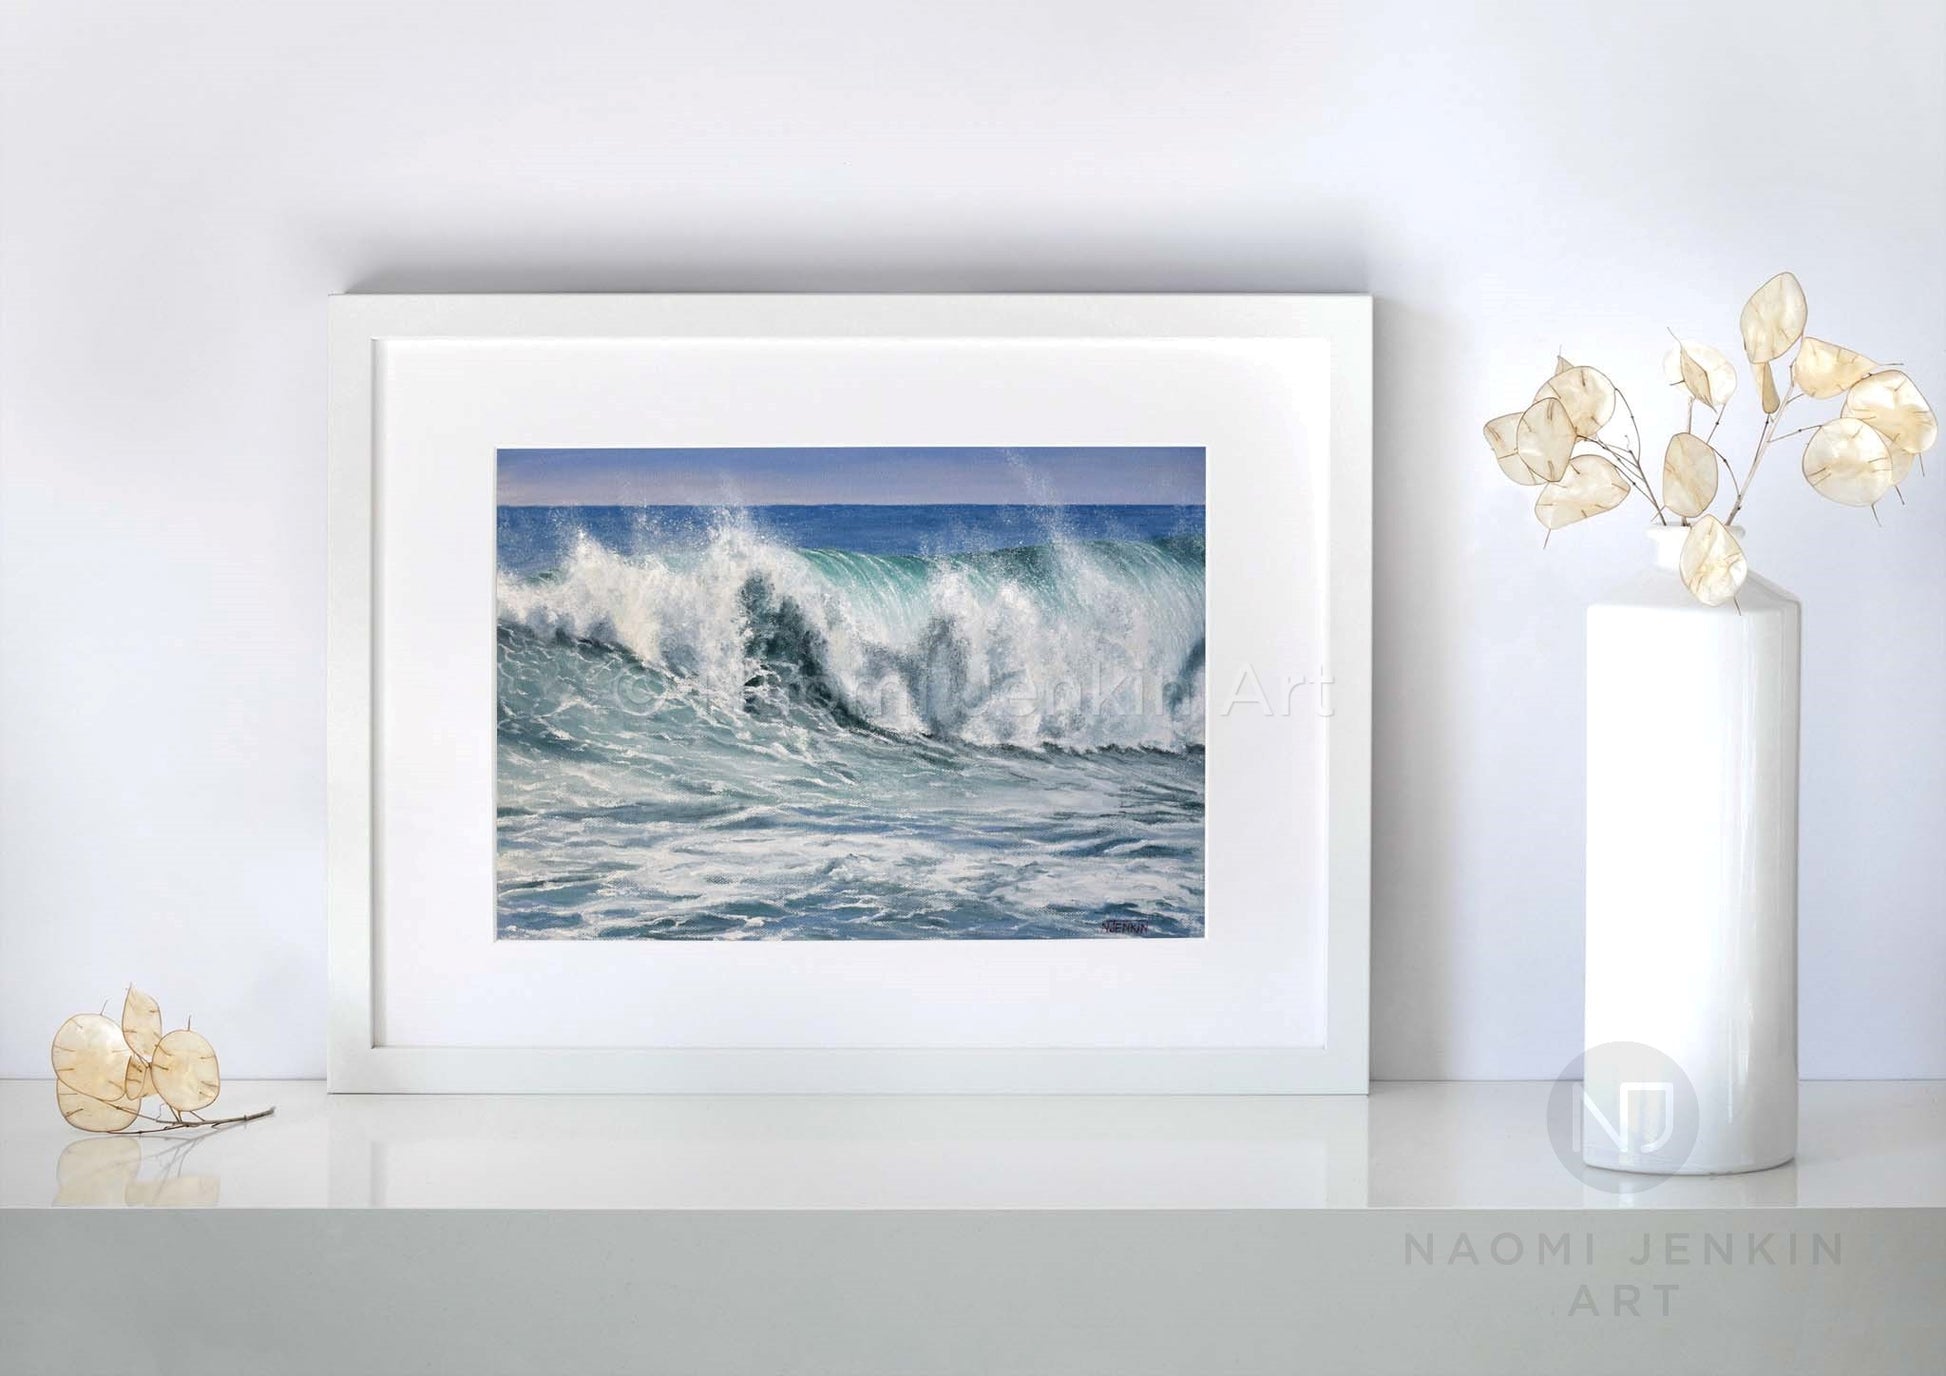 Print of a seascape painting by Naomi Jenkin Art. 